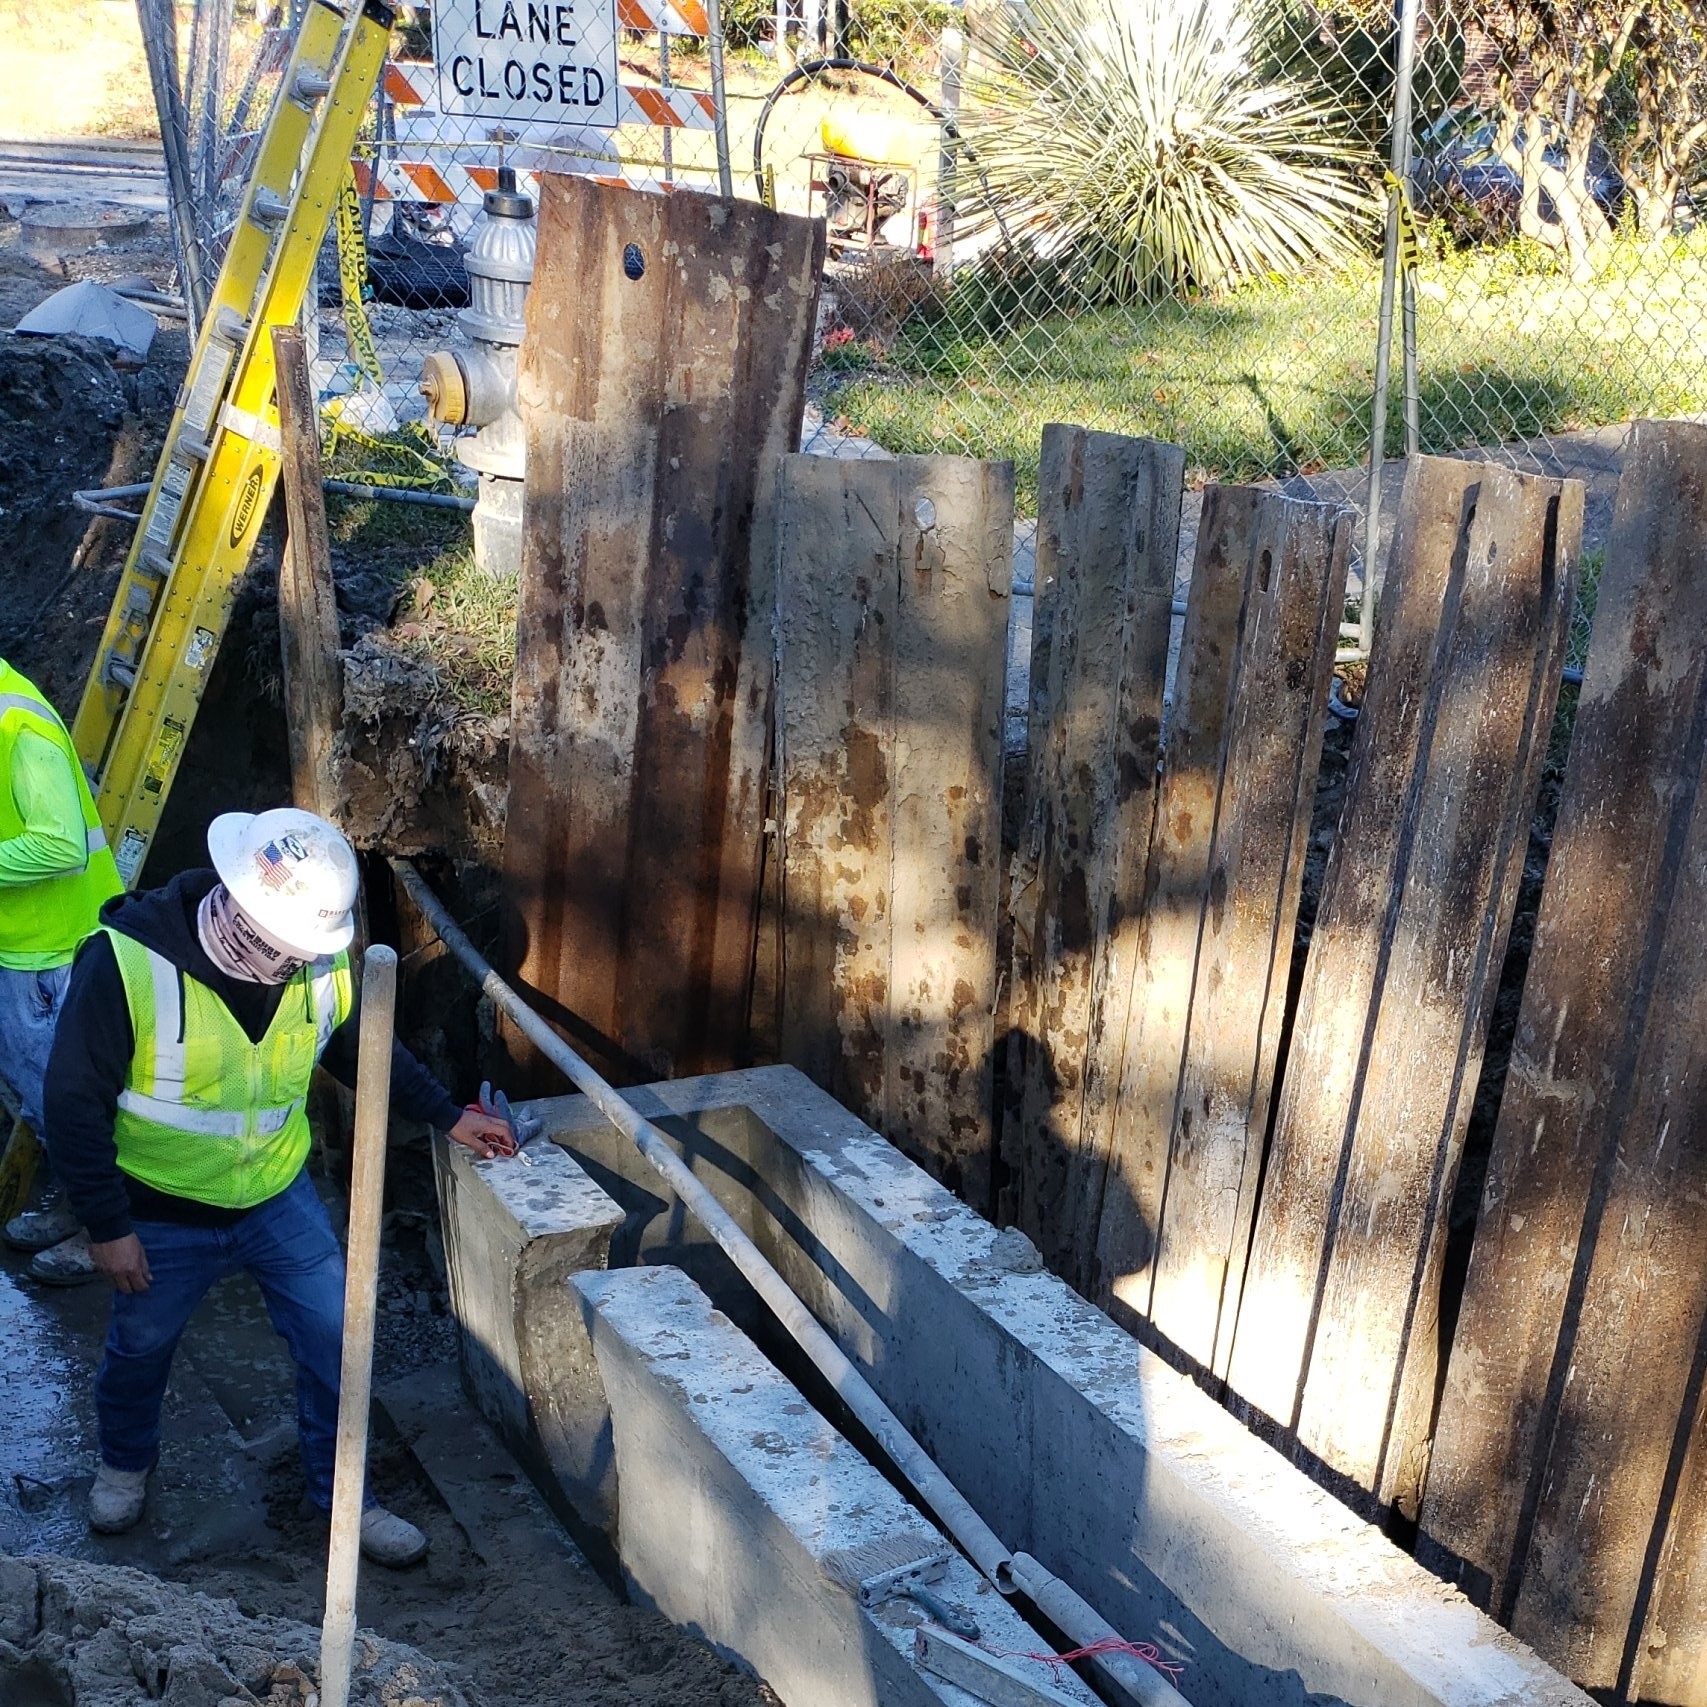 WATERLINE, DRAINAGE LINE WORK CONTINUES ON LAKE TERRACE AND OAKS GROUP D PROJECT